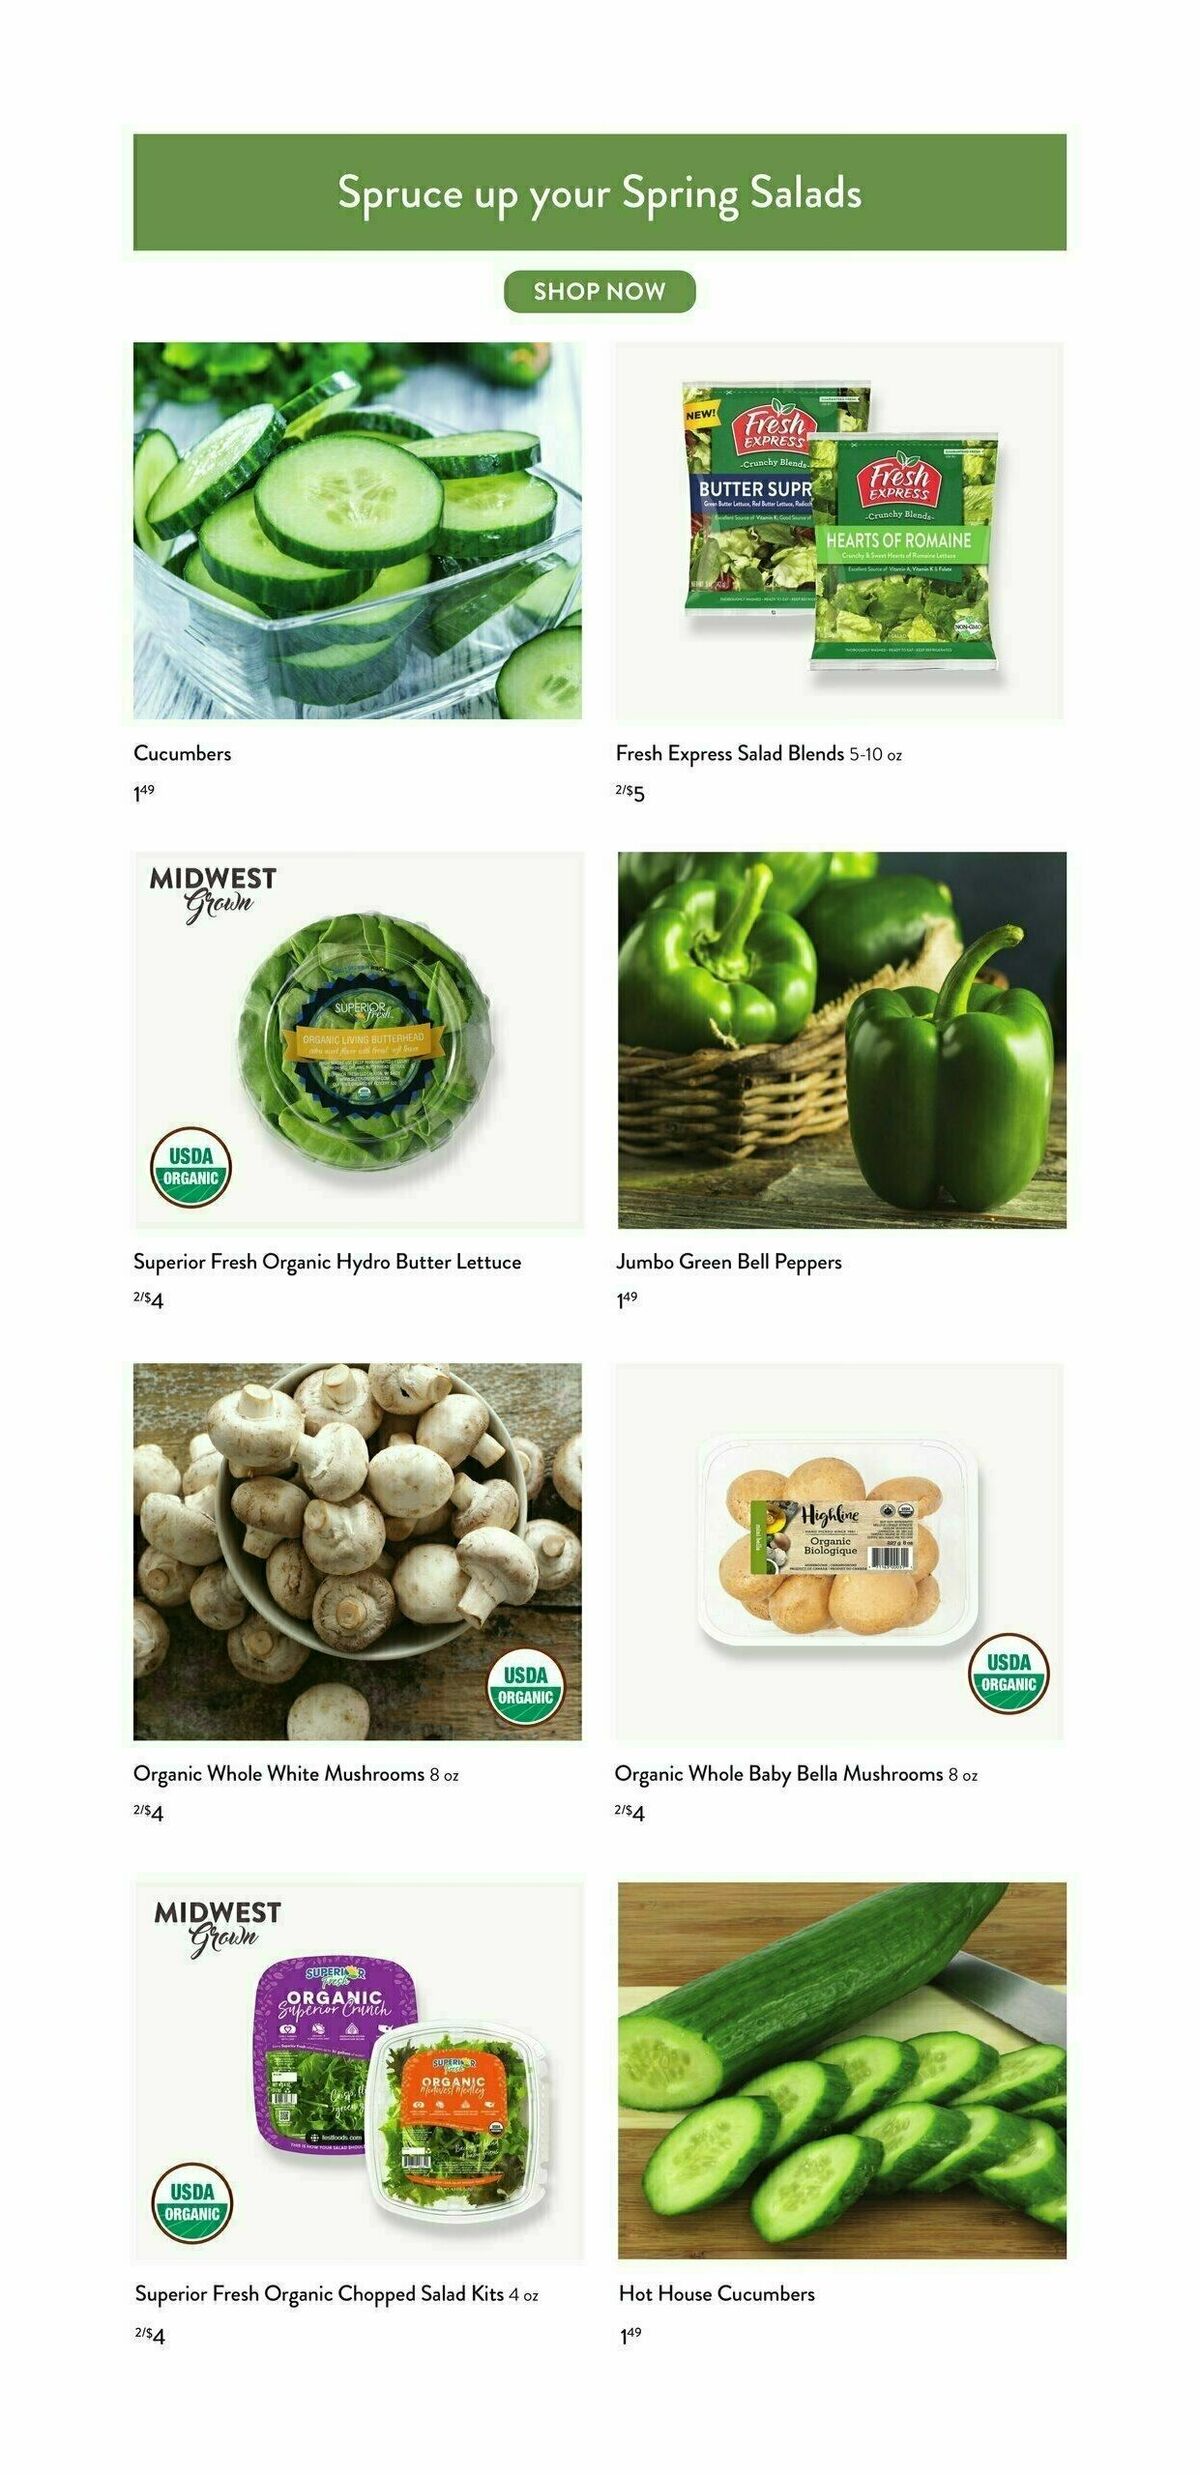 Fresh Thyme Farmers Market Weekly Ad from April 10